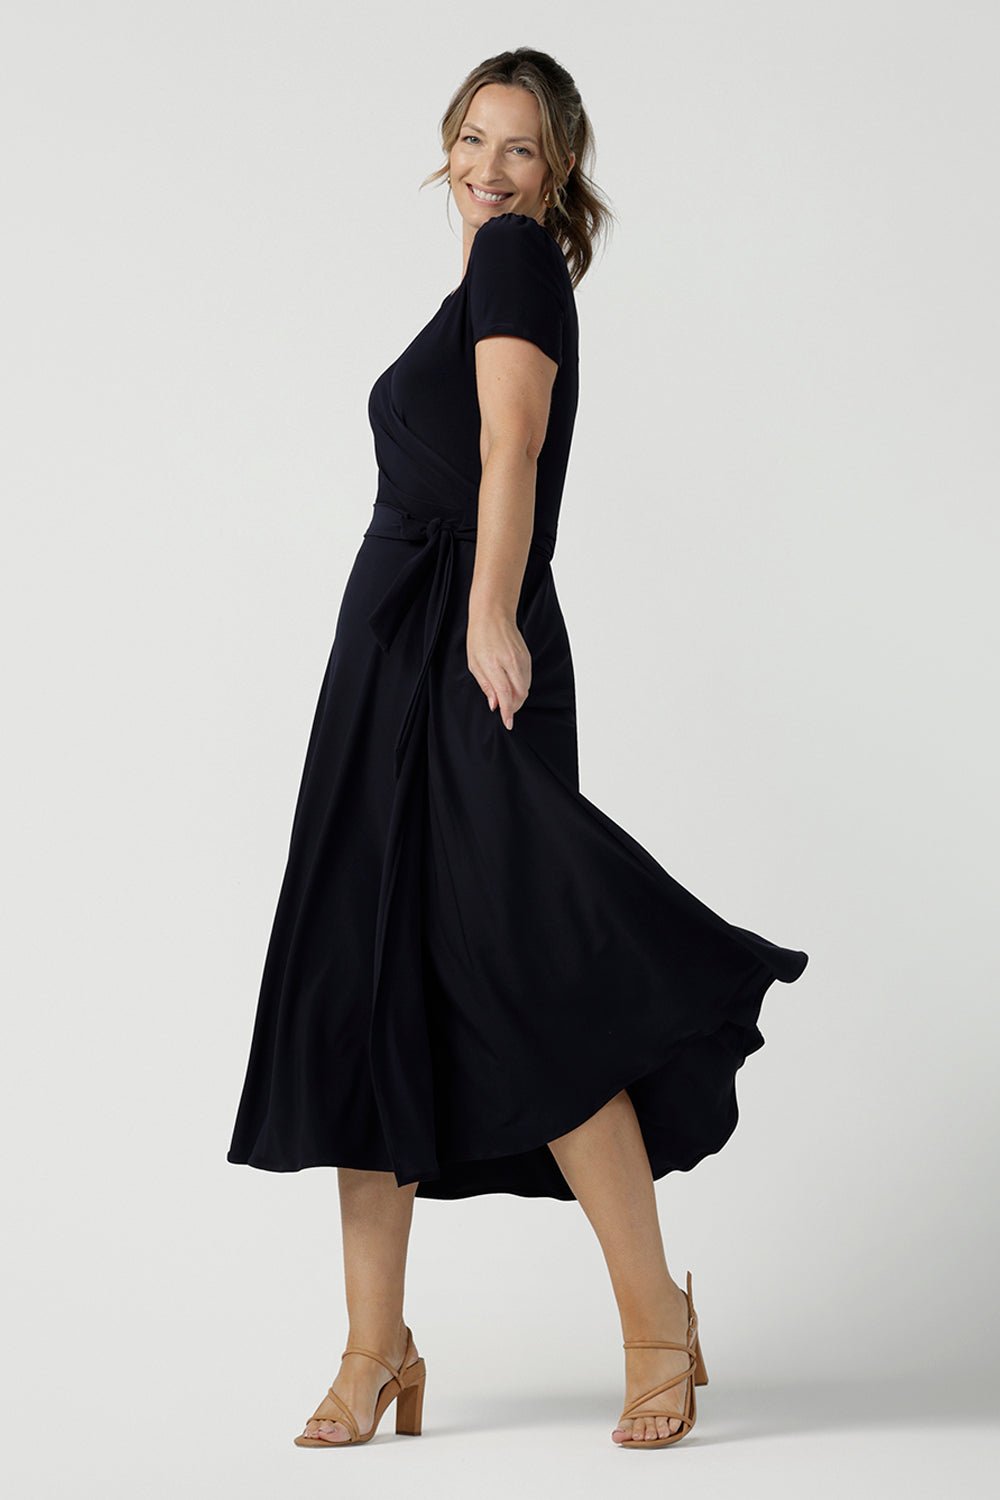 An over 40, size 10 woman wearing a navy, wrap dress with short sleeves. A great dress for summer casual wear, or for travel. Shop made in Australia dresses in petite to plus sizes online at Australian fashion brand, Leina & Fleur.